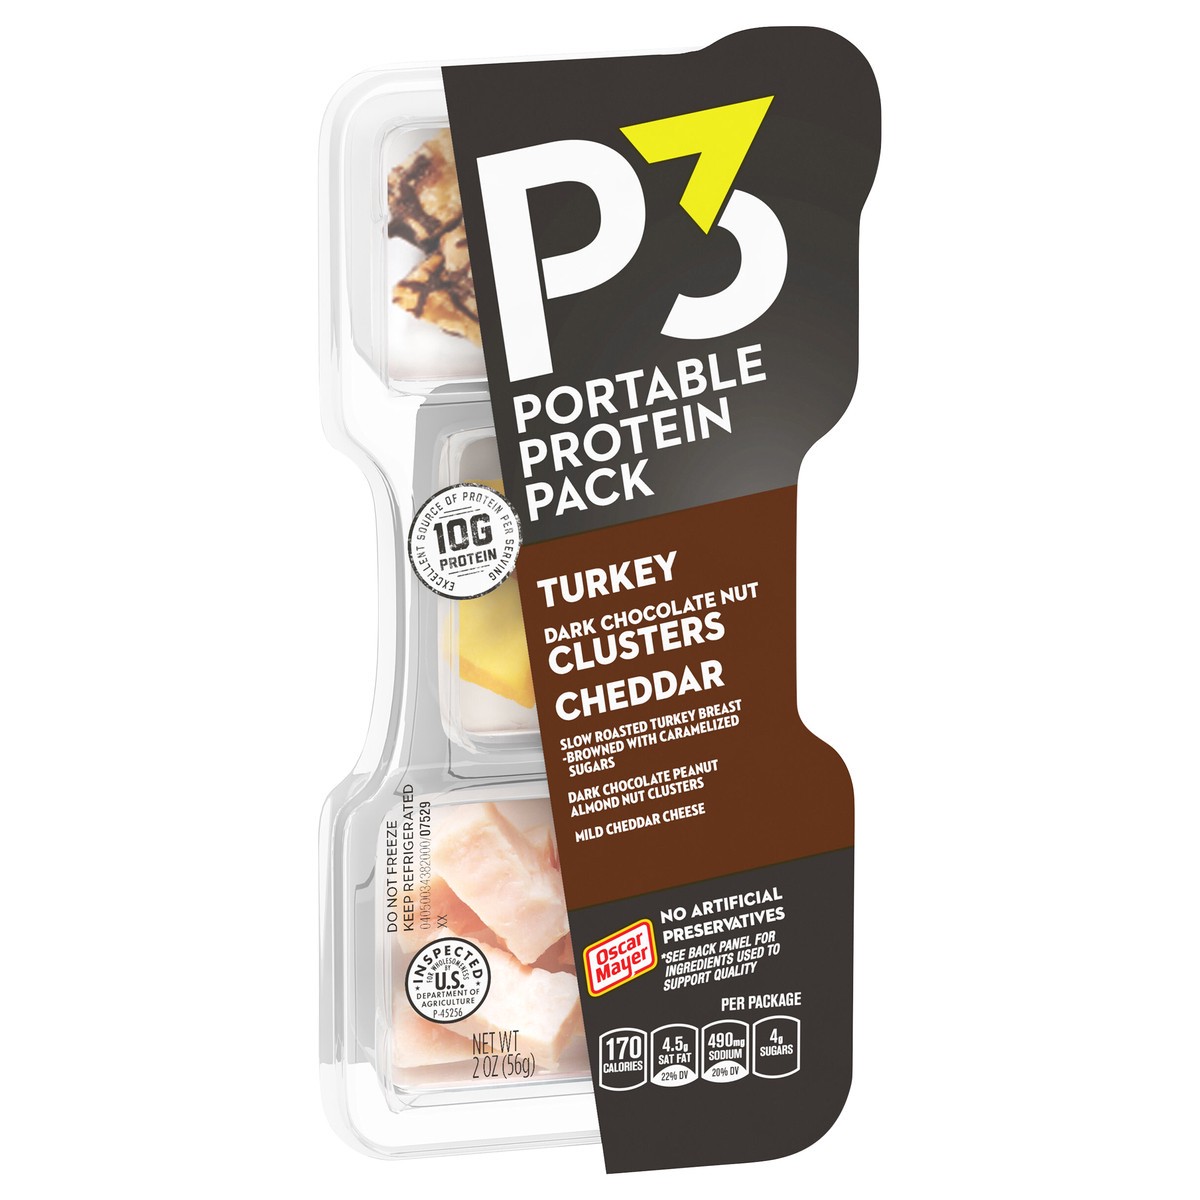 slide 3 of 9, P3 Portable Protein Pack Portable Protein Snack Pack with Dark Chocolate Almond Nut Clusters, Turkey & Cheddar Cheese - 2oz, 2 oz